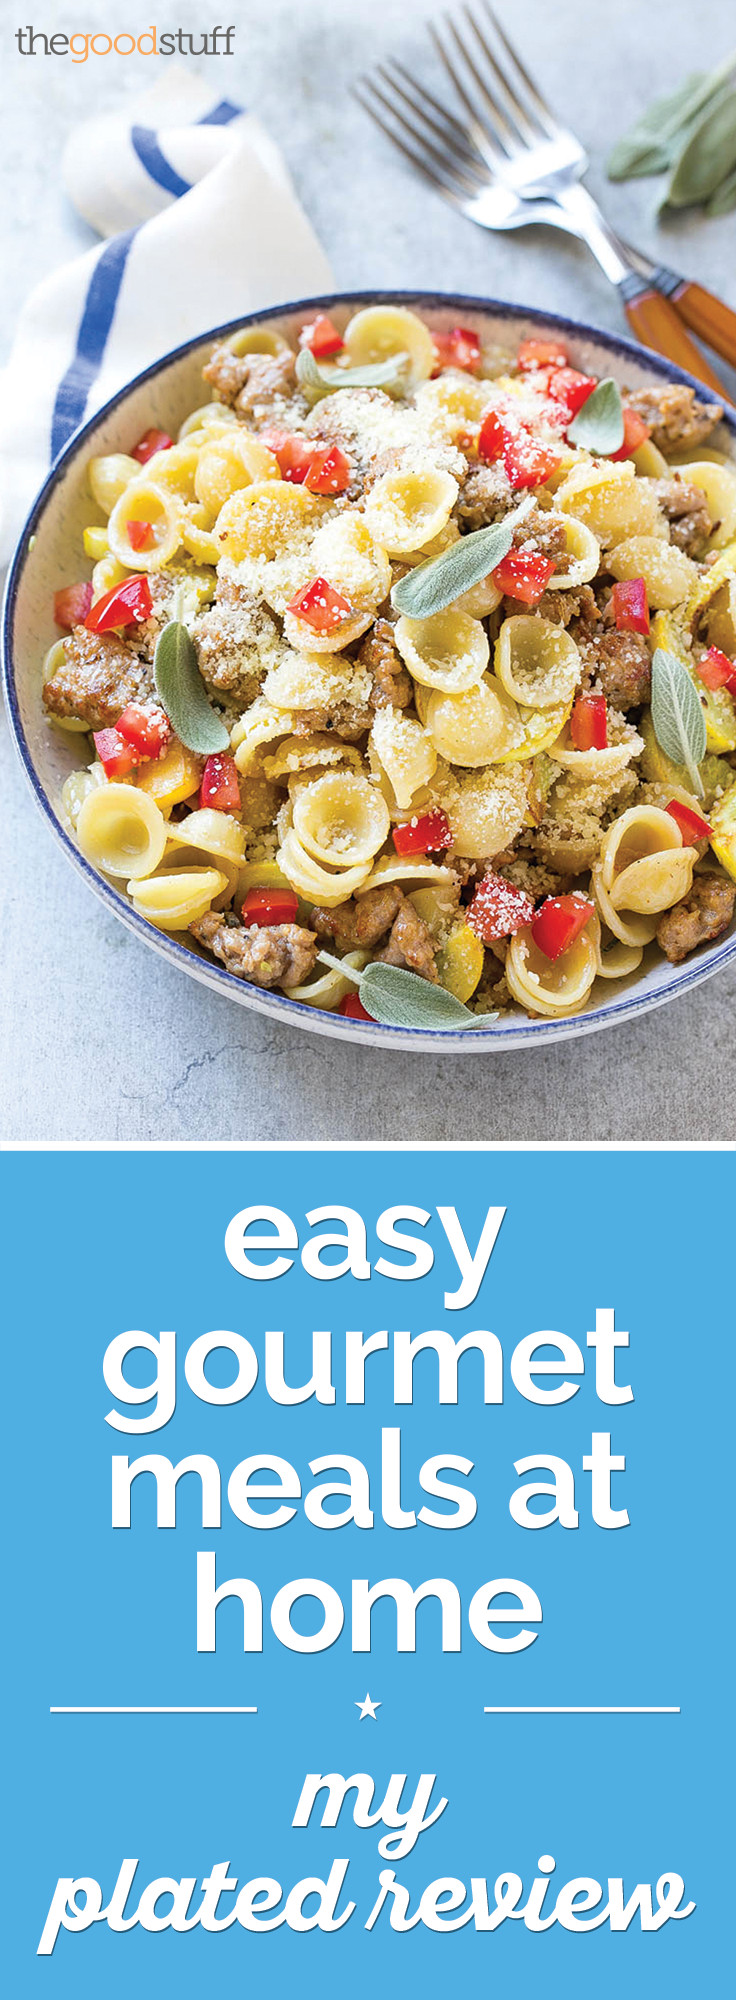 Easy Gourmet Dinners
 Easy Gourmet Meals at Home My Plated Review thegoodstuff